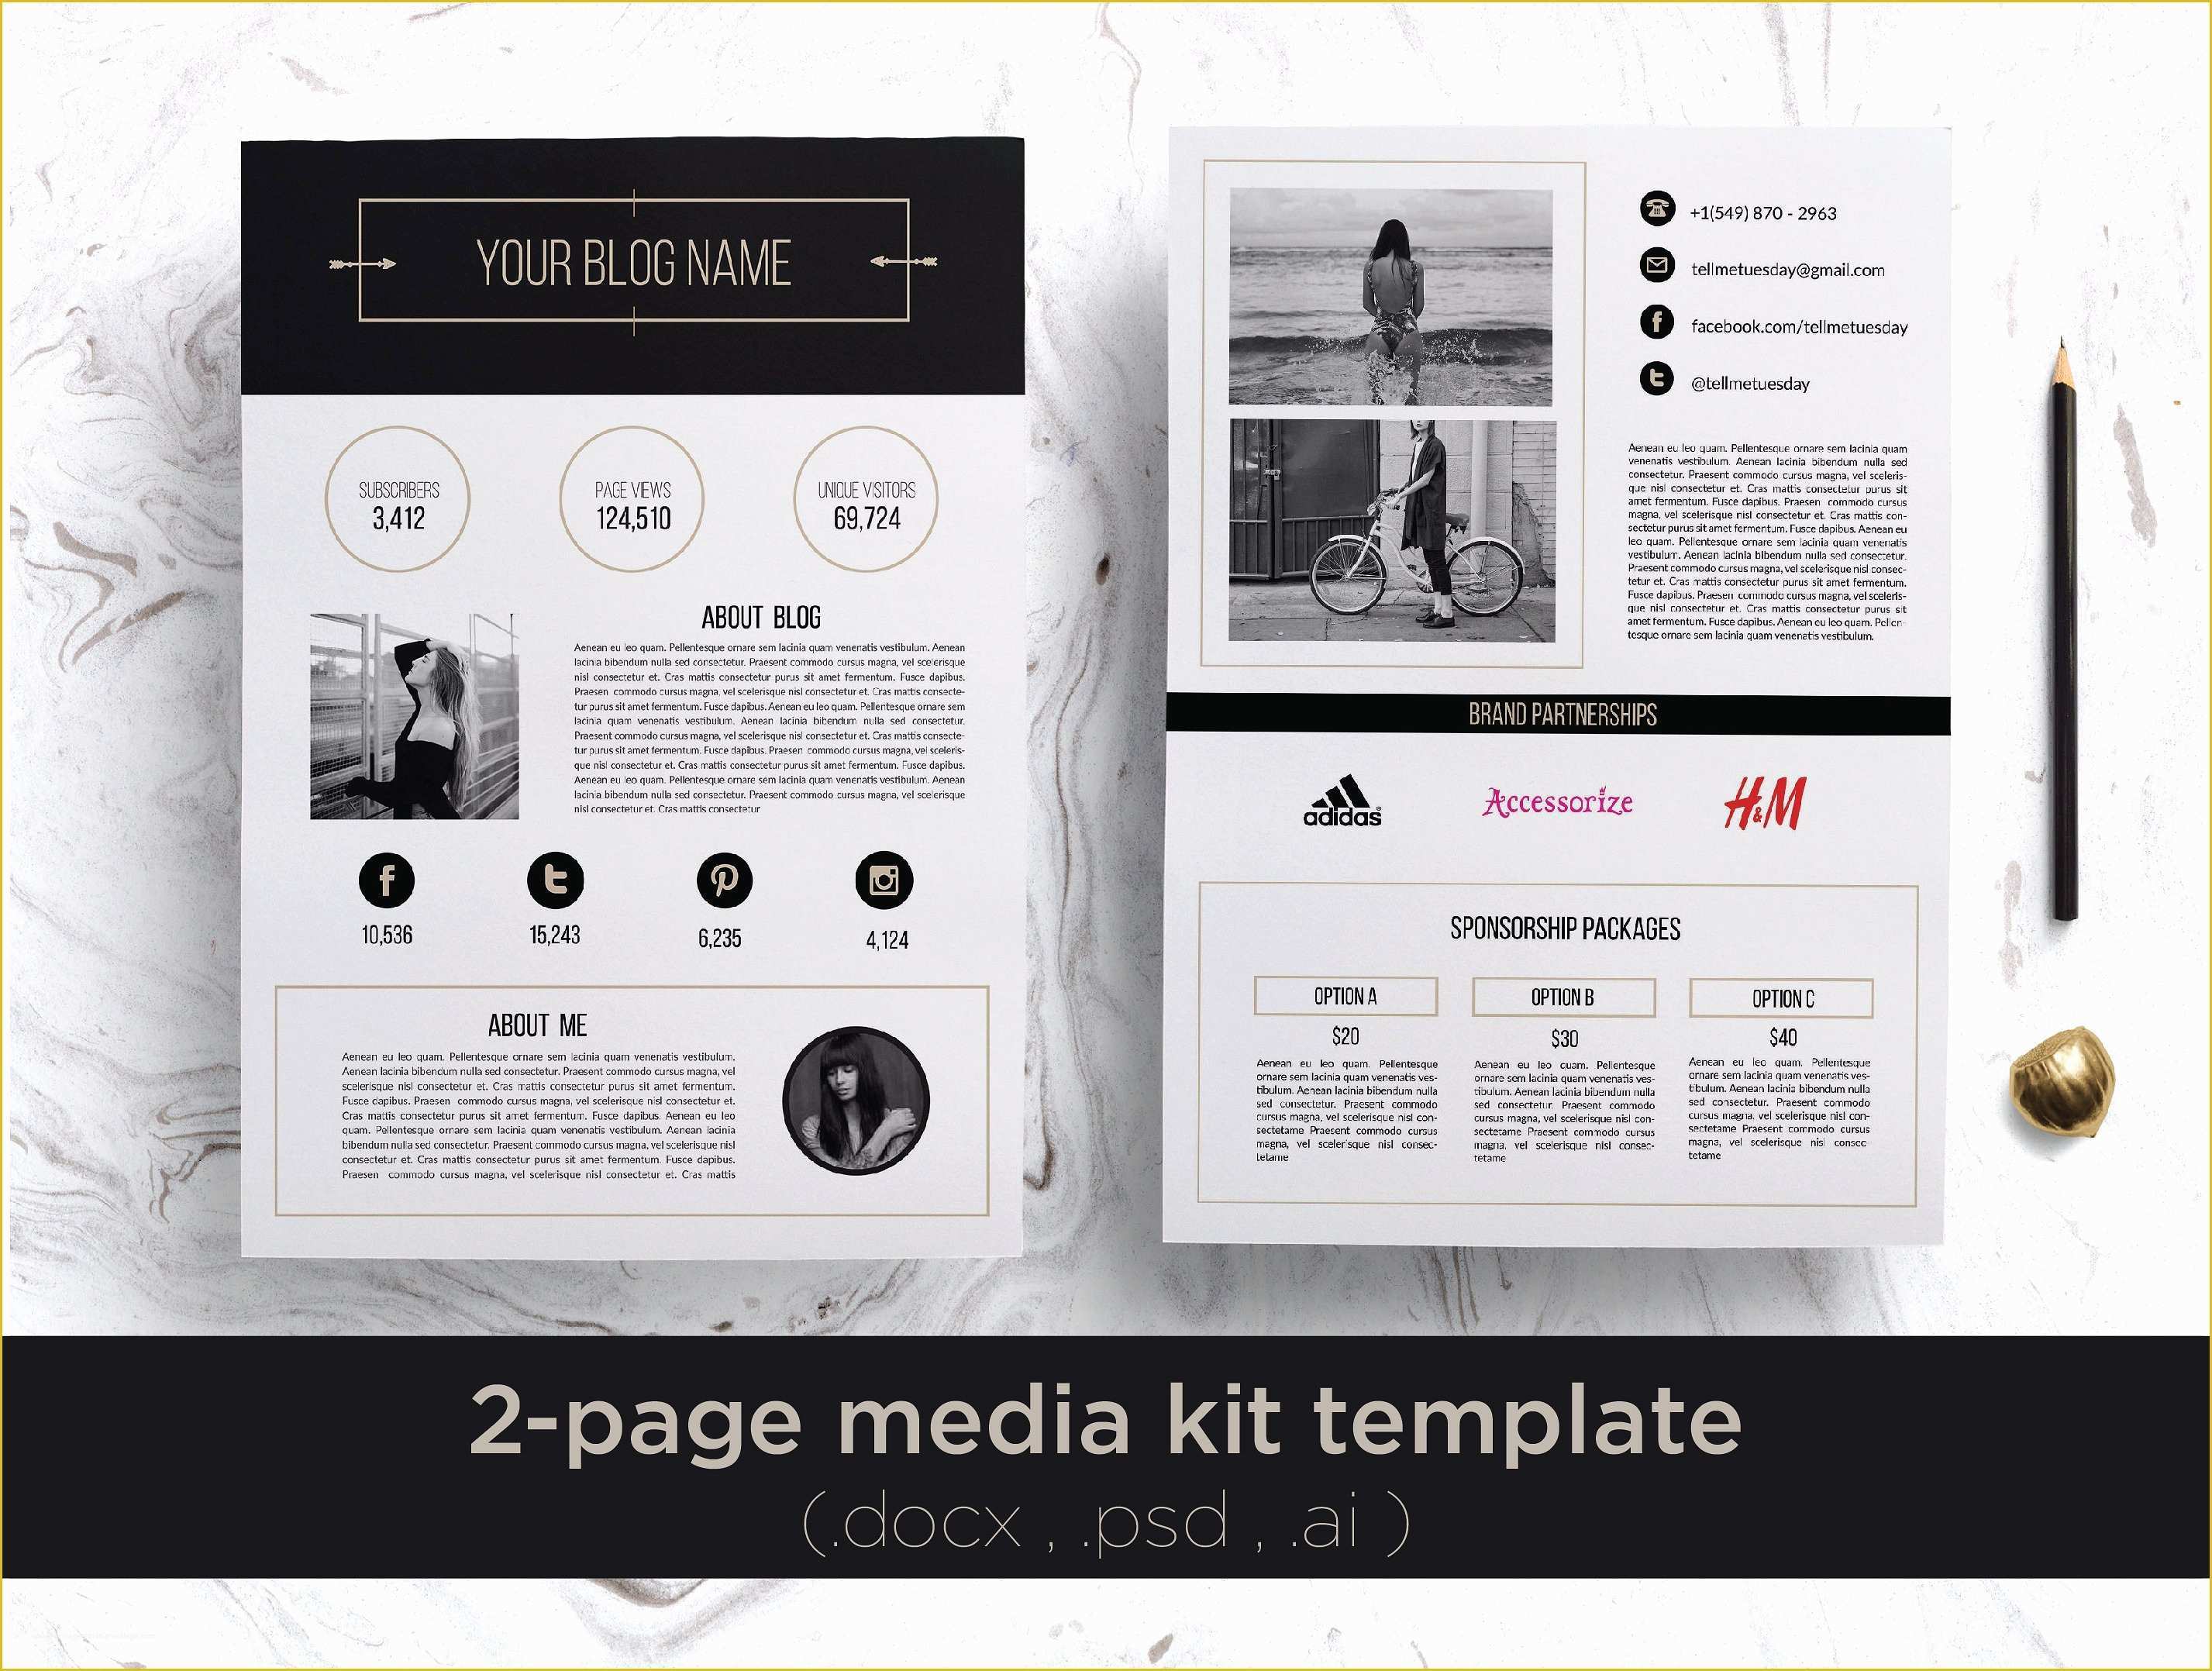 Free Press Kit Template Psd Of 2 Page Media Kit Template Stationery Templates